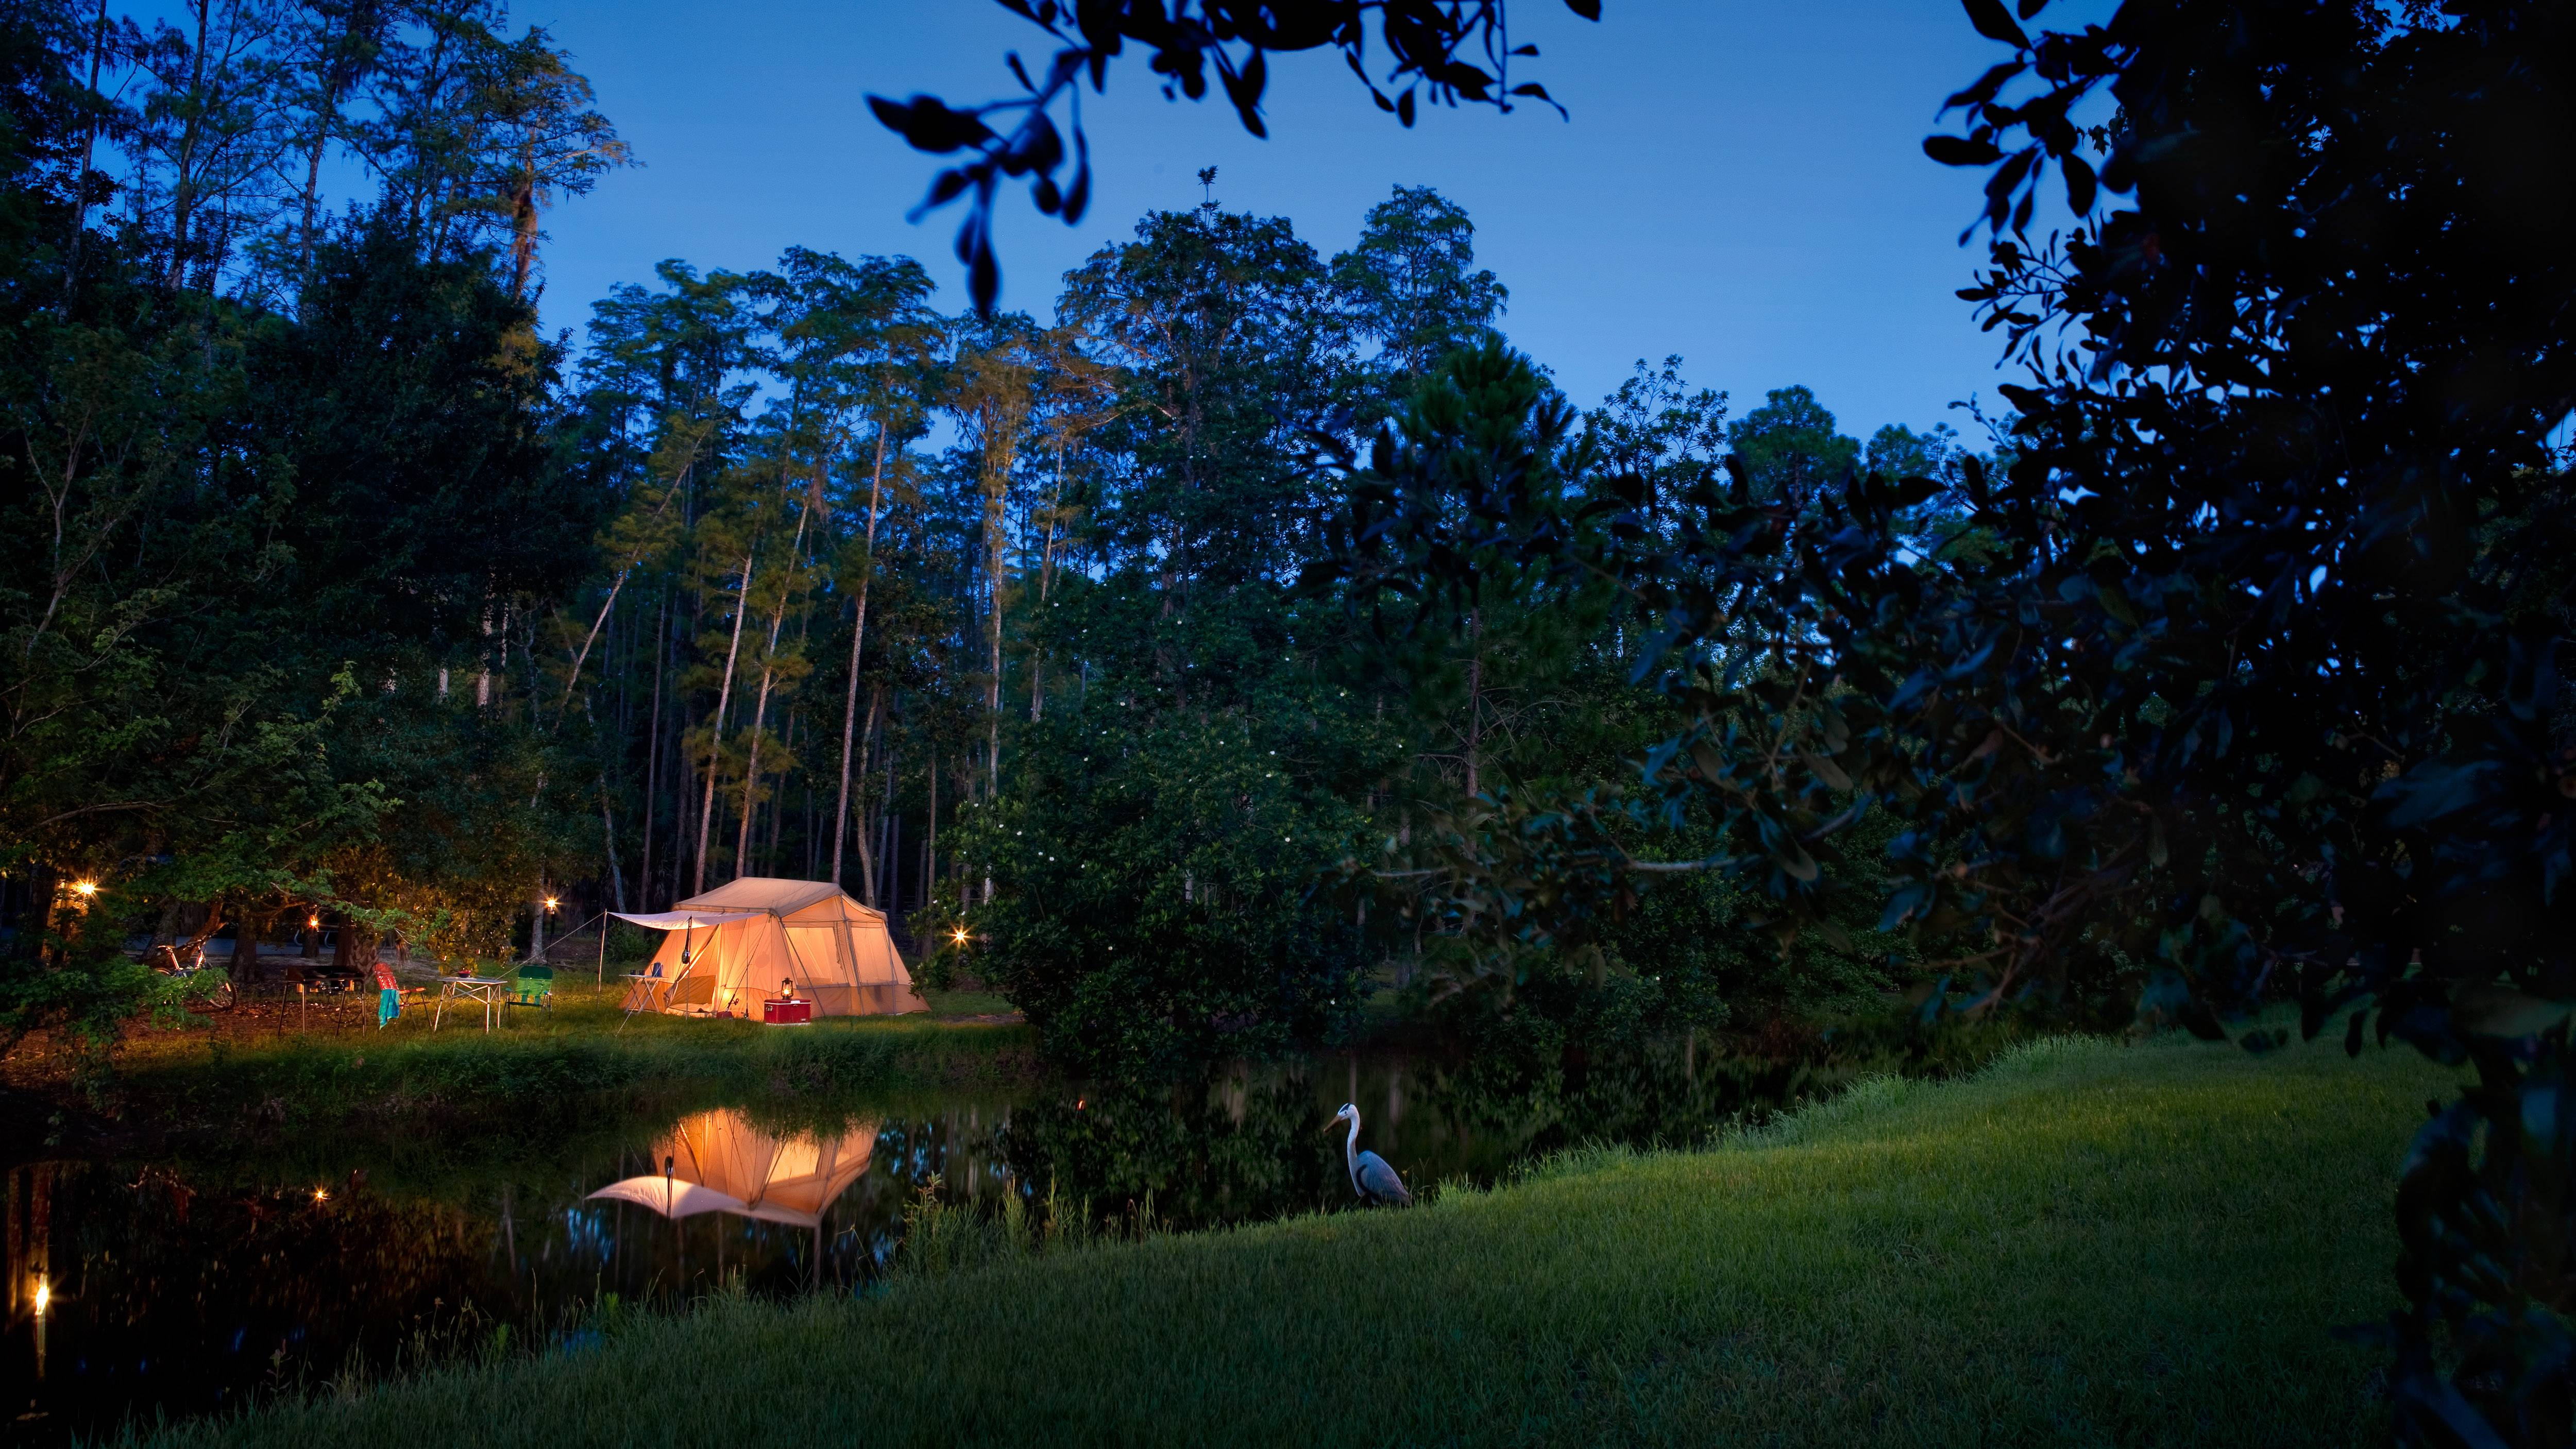 Disney’s Fort Wilderness Resort &amp; Campground will remain temporarily closed at this time